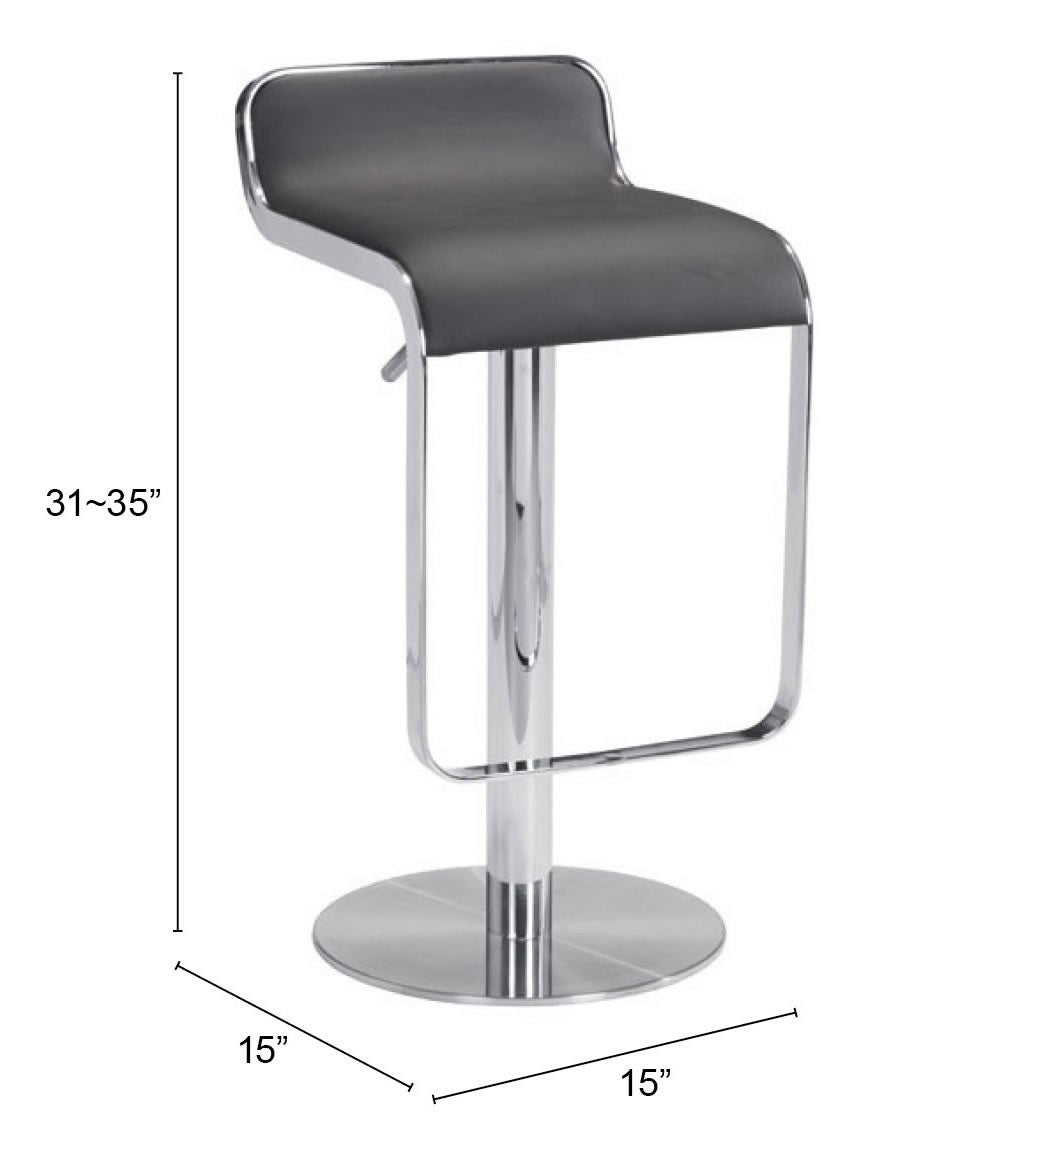 27" Black And Silver Steel Swivel Backless Adjustable Height Bar Chair